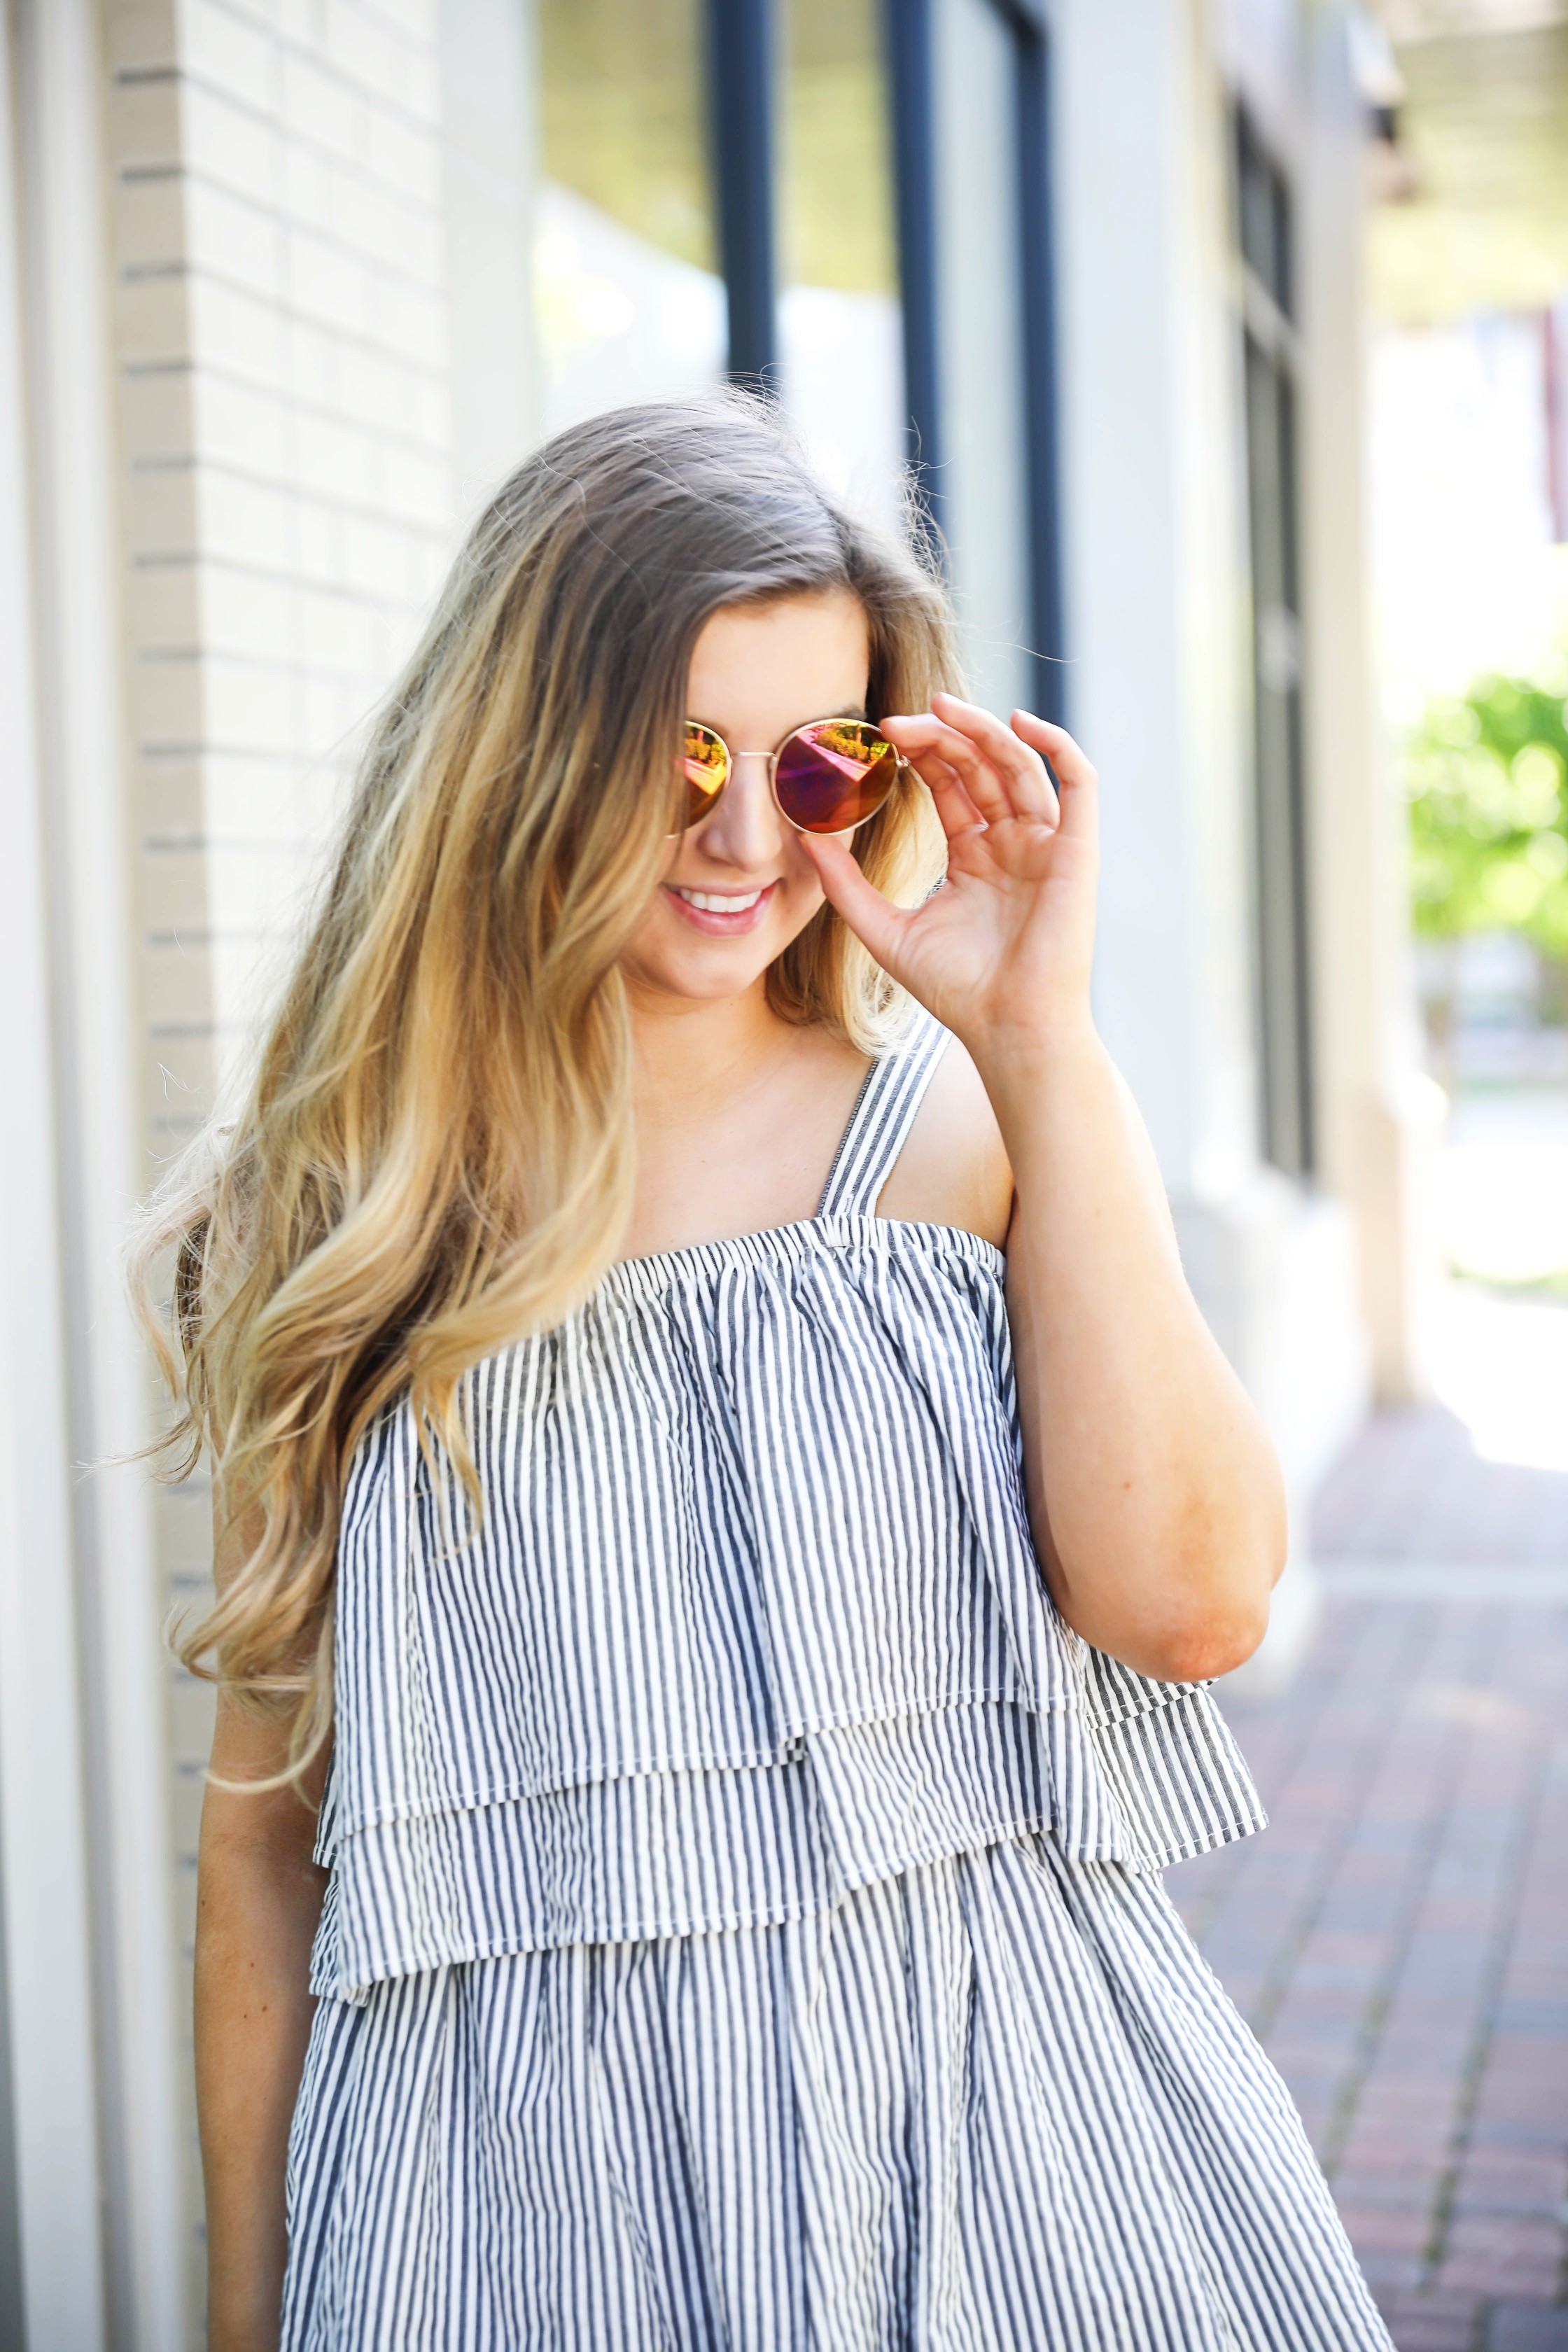 Striped ruffle dress with circle sunglasses and brown leather sandals! By Lauren Lindmark on dailydoseofcharm.com fashion blog daily dose of charm